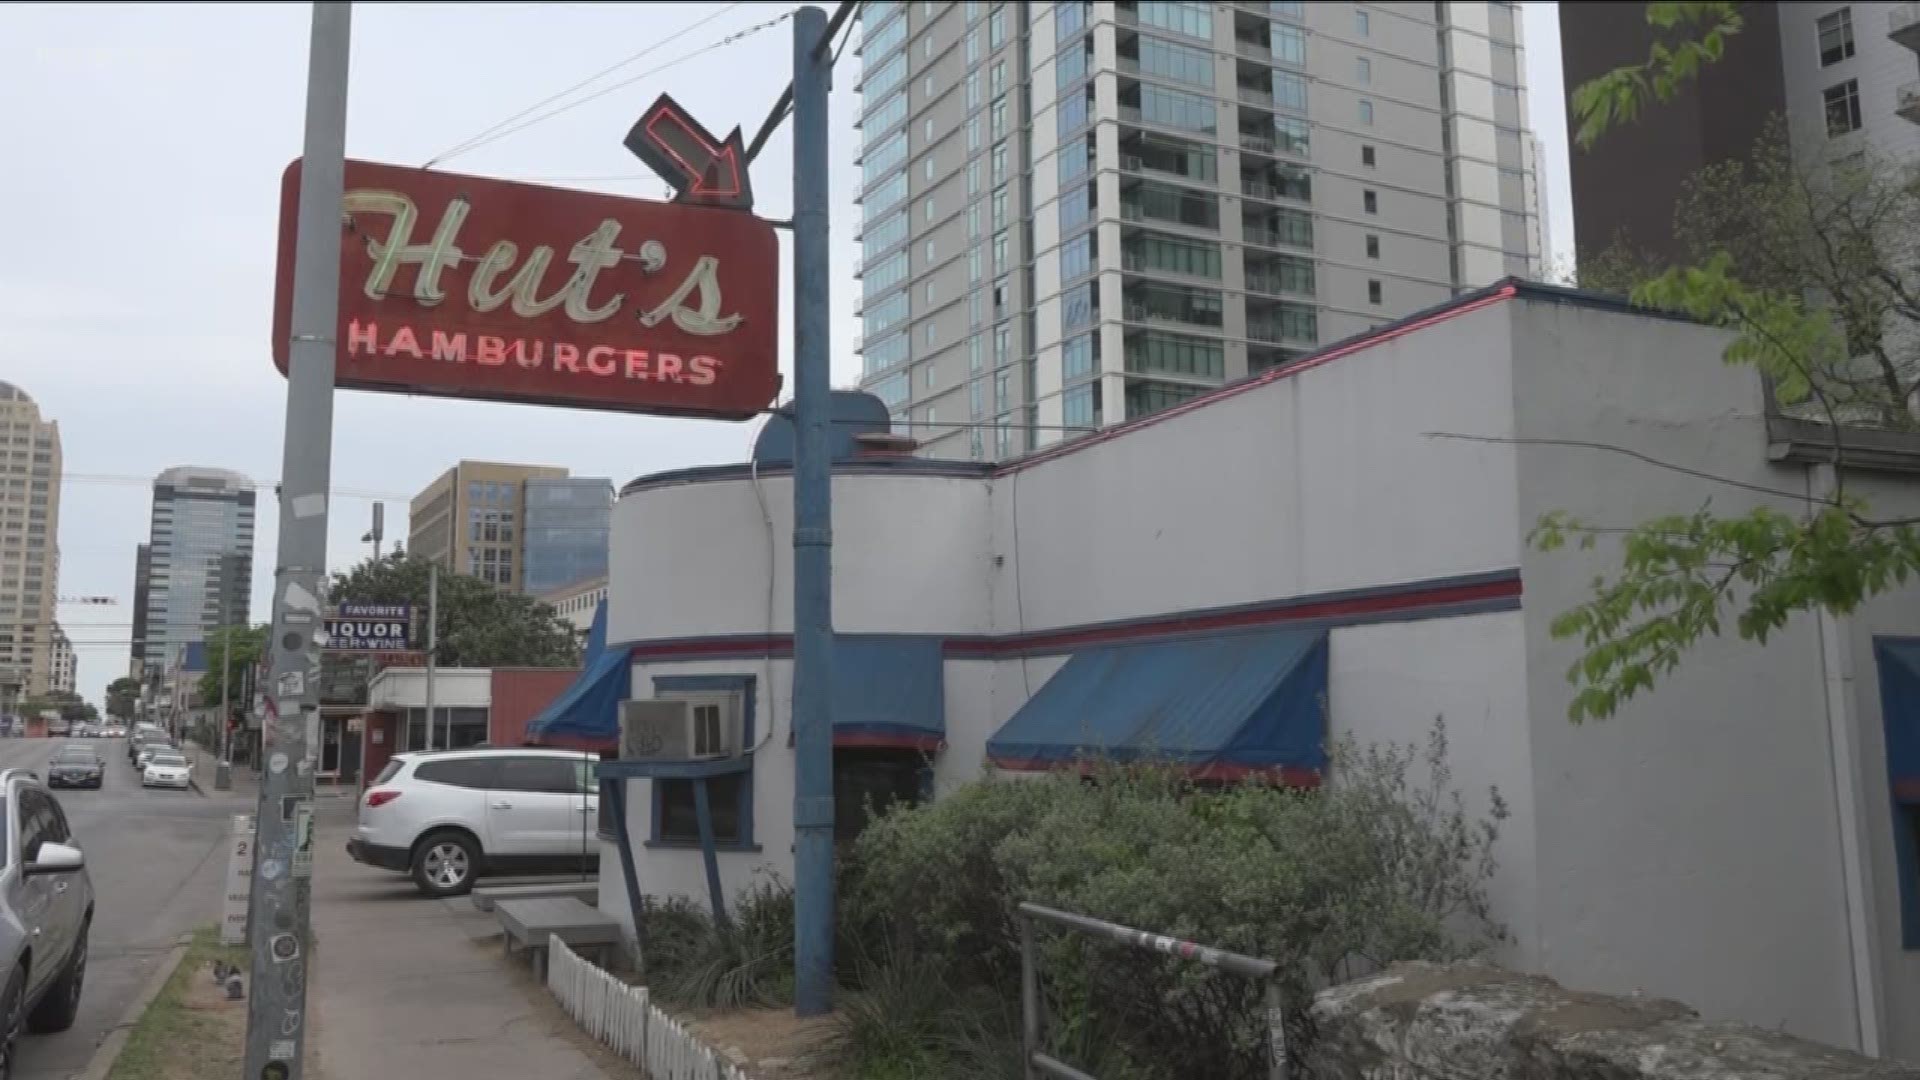 While some restaurants crumble to rising rents, other Austin staples – like Hut's Hamburgers – thrive.